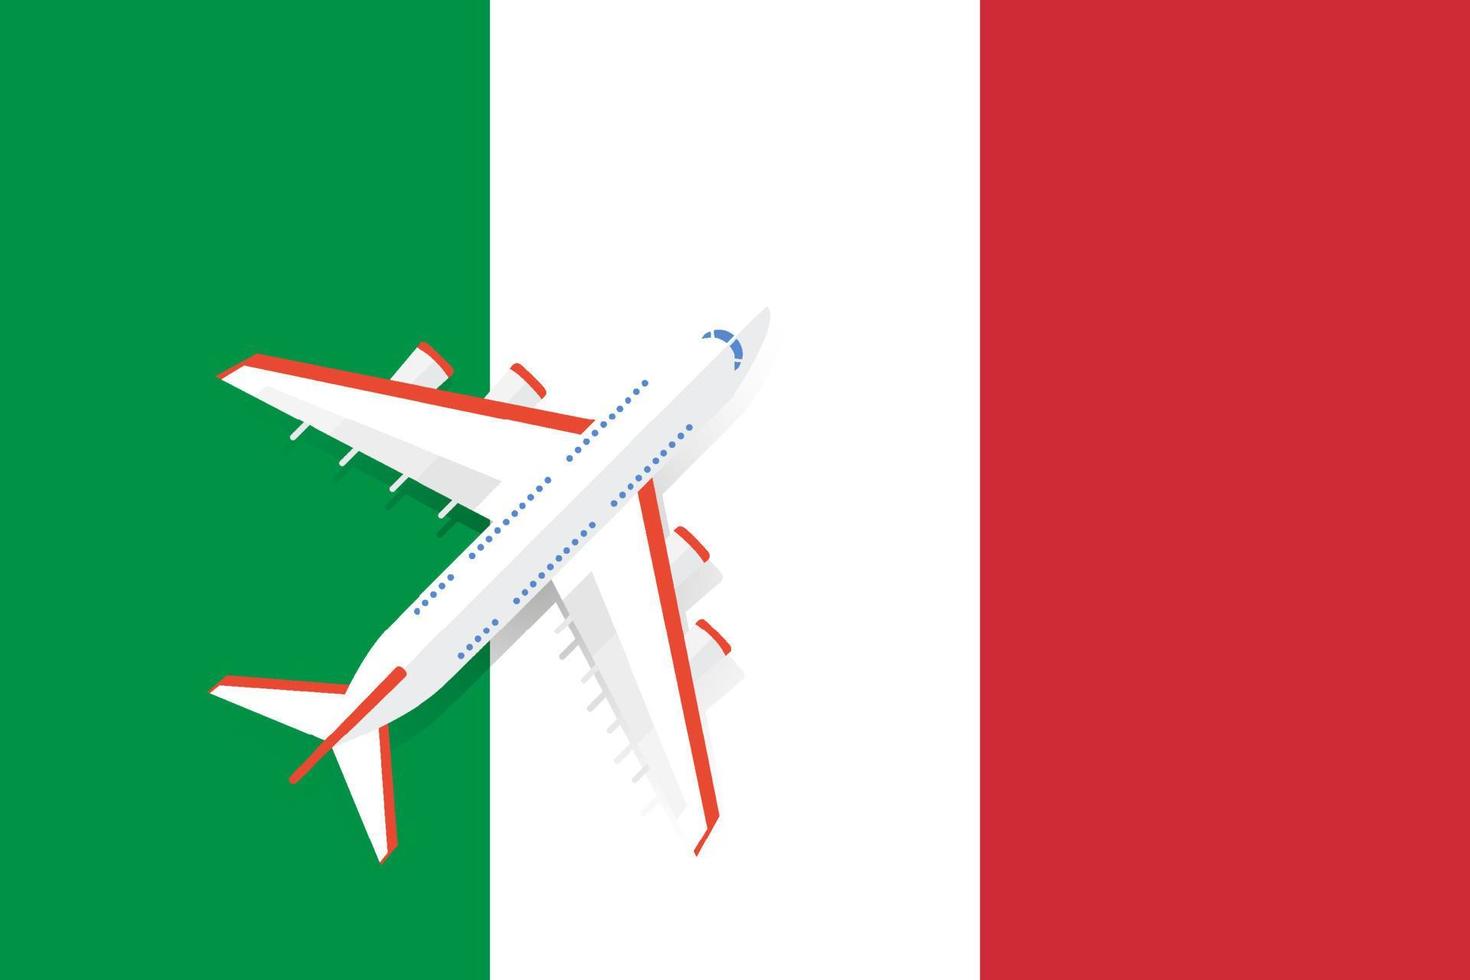 Vector Illustration of a passenger plane flying over the flag of Italy. Concept of tourism and travel